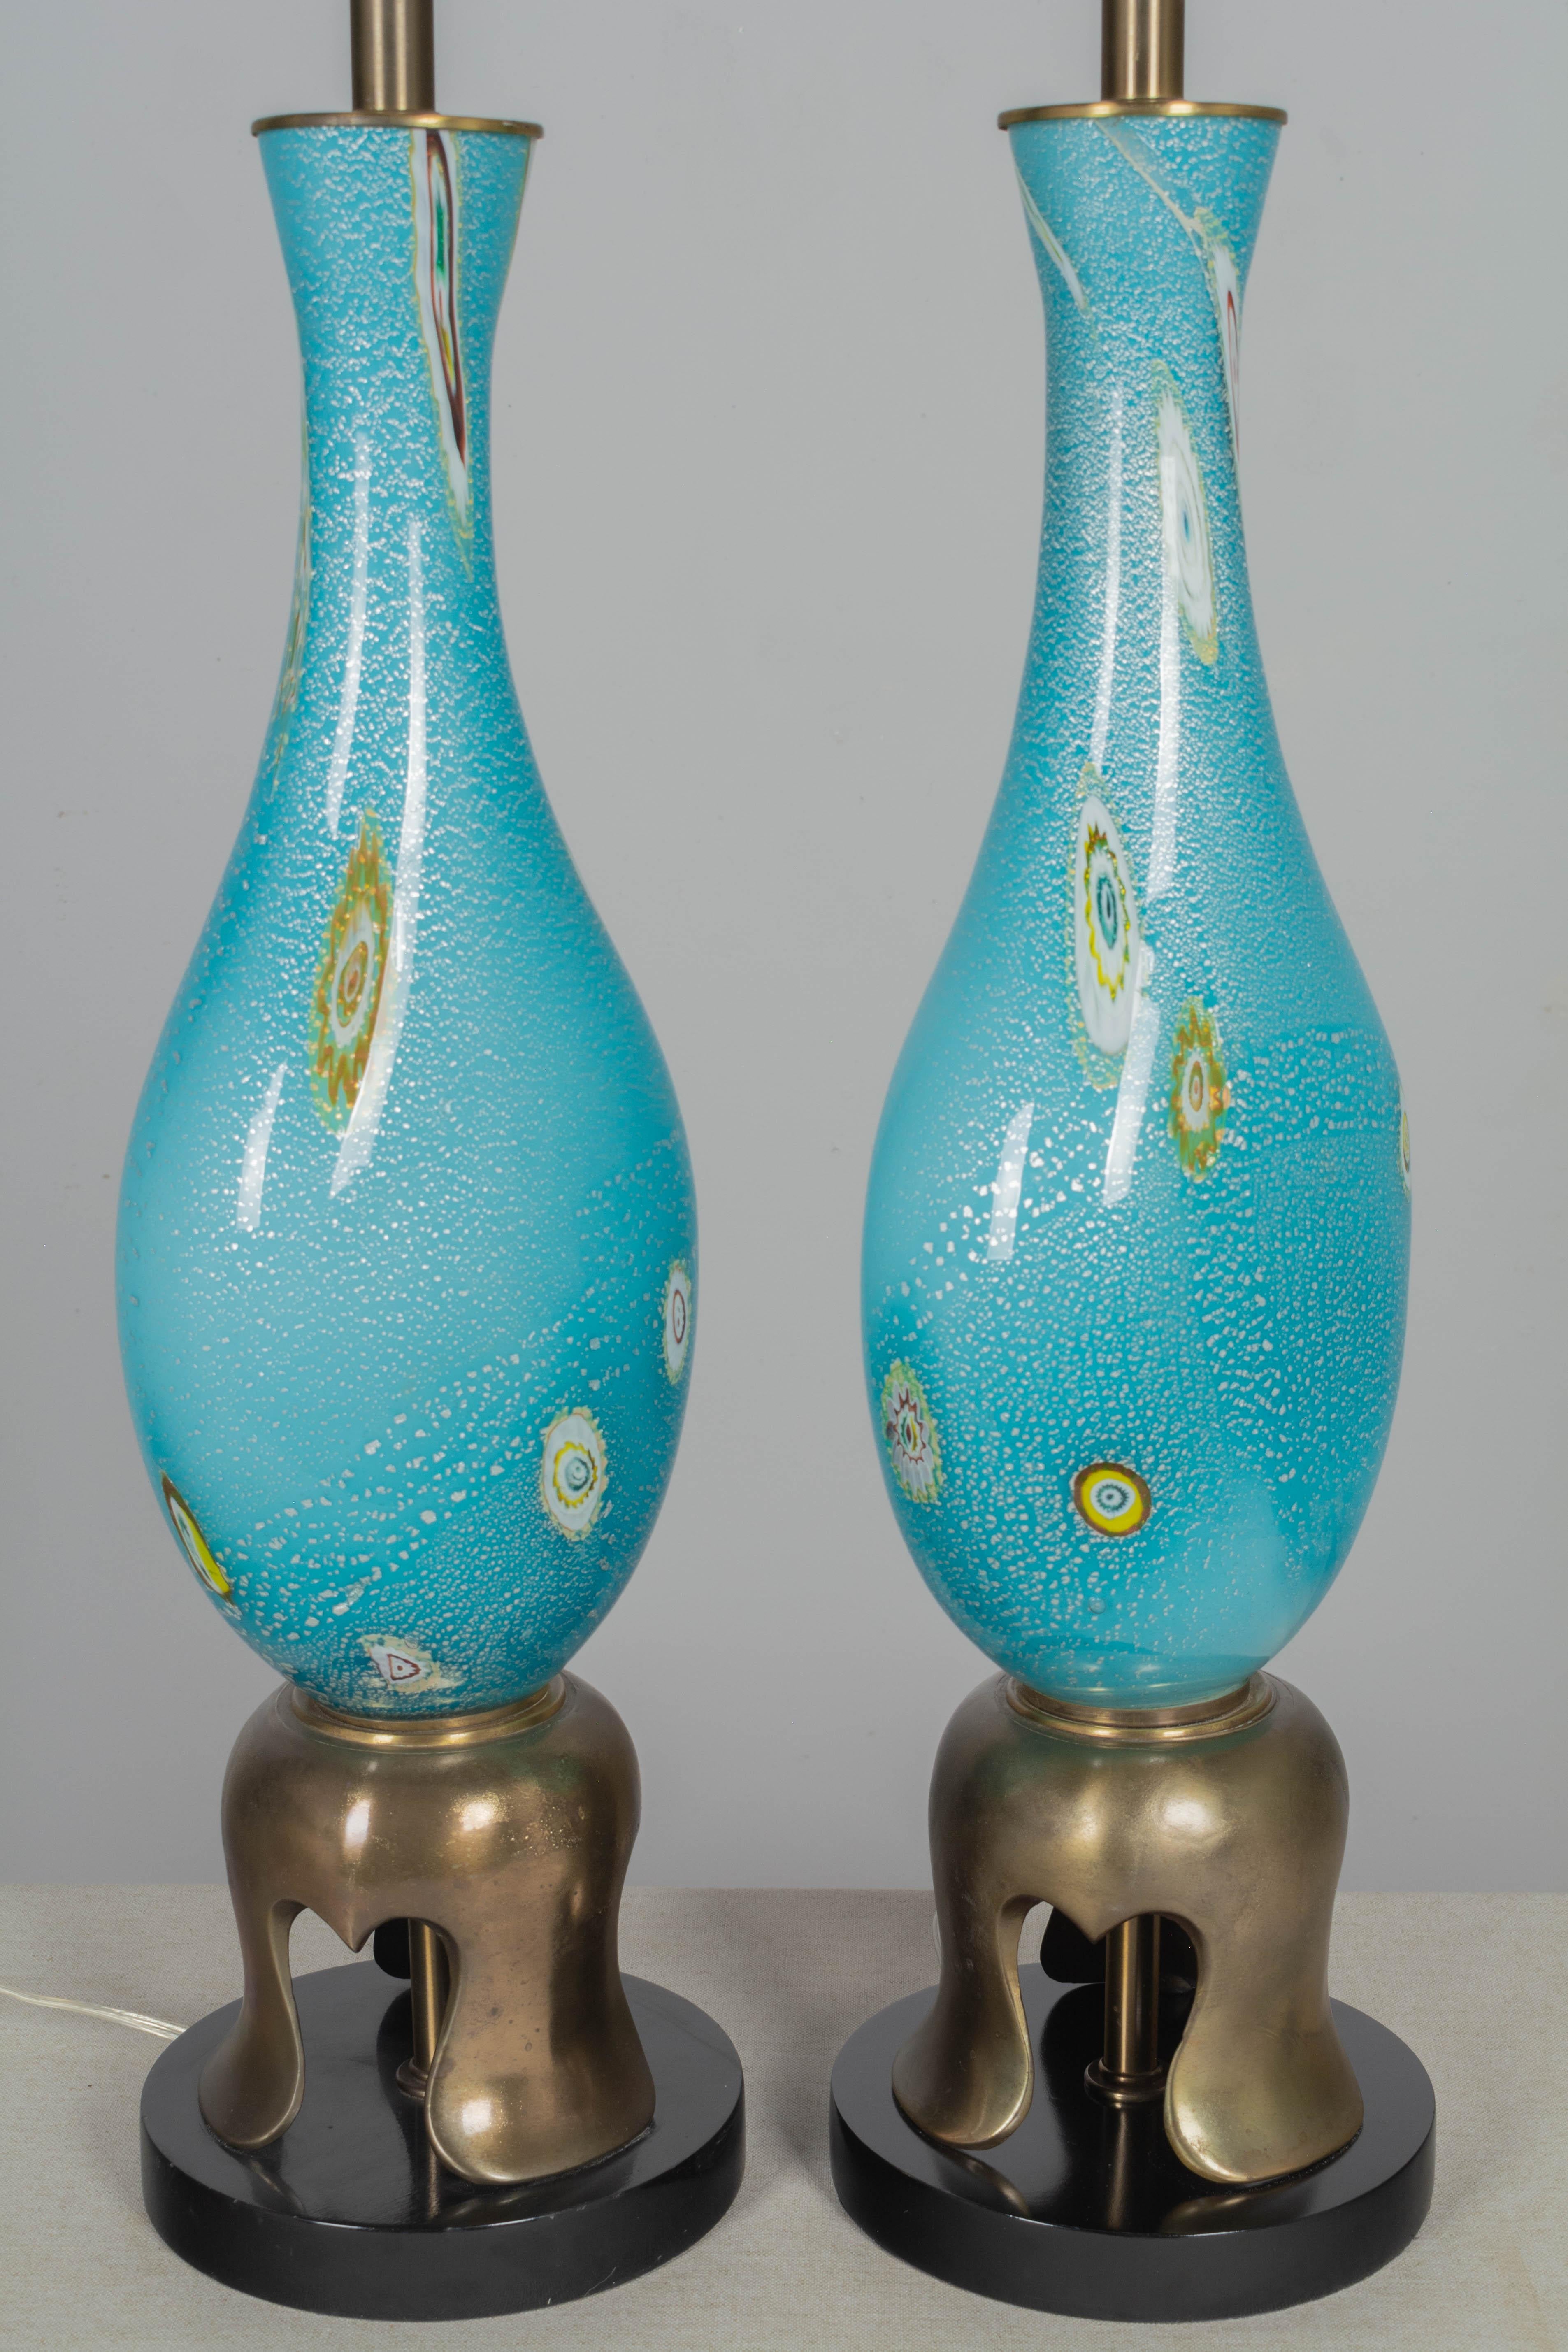 20th Century Murano Glass Barovier & Toso Lamp Pair For Sale